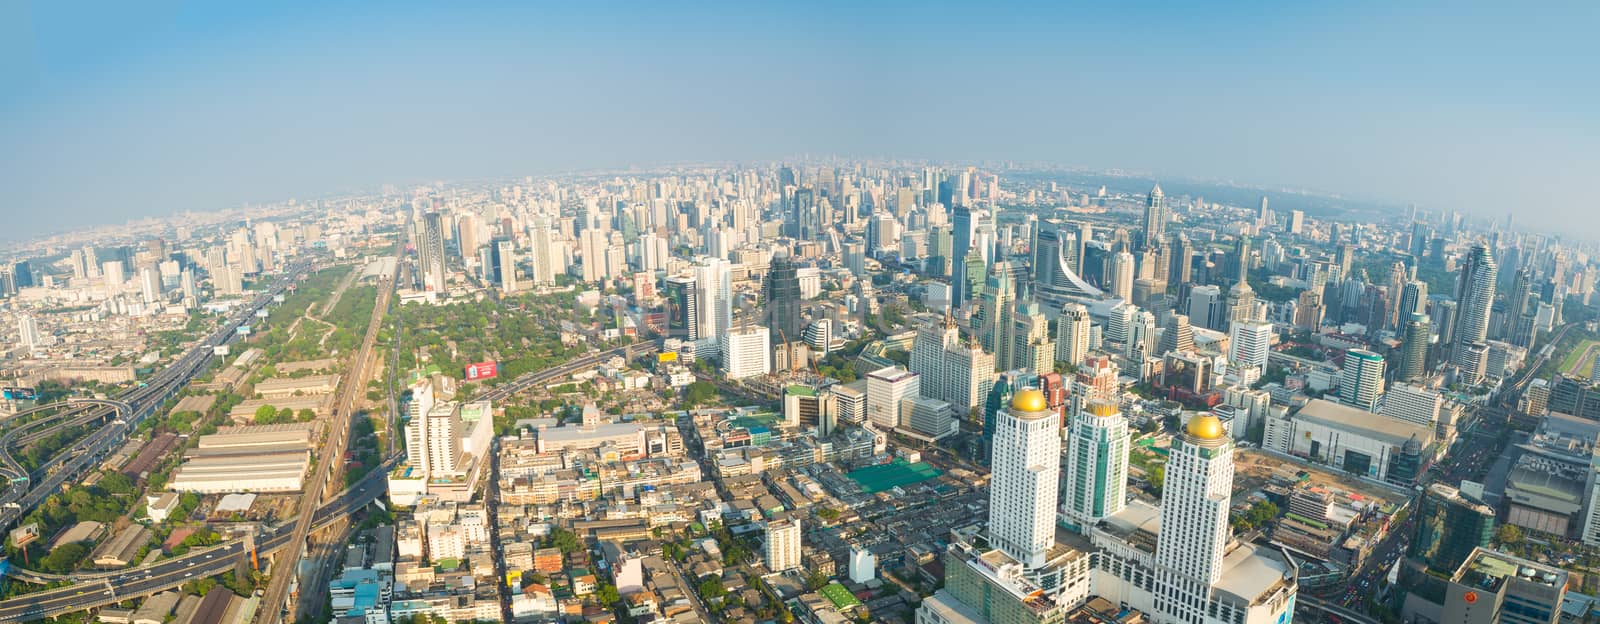 Bangkok Cityscape Scenic Aerial view by thampapon